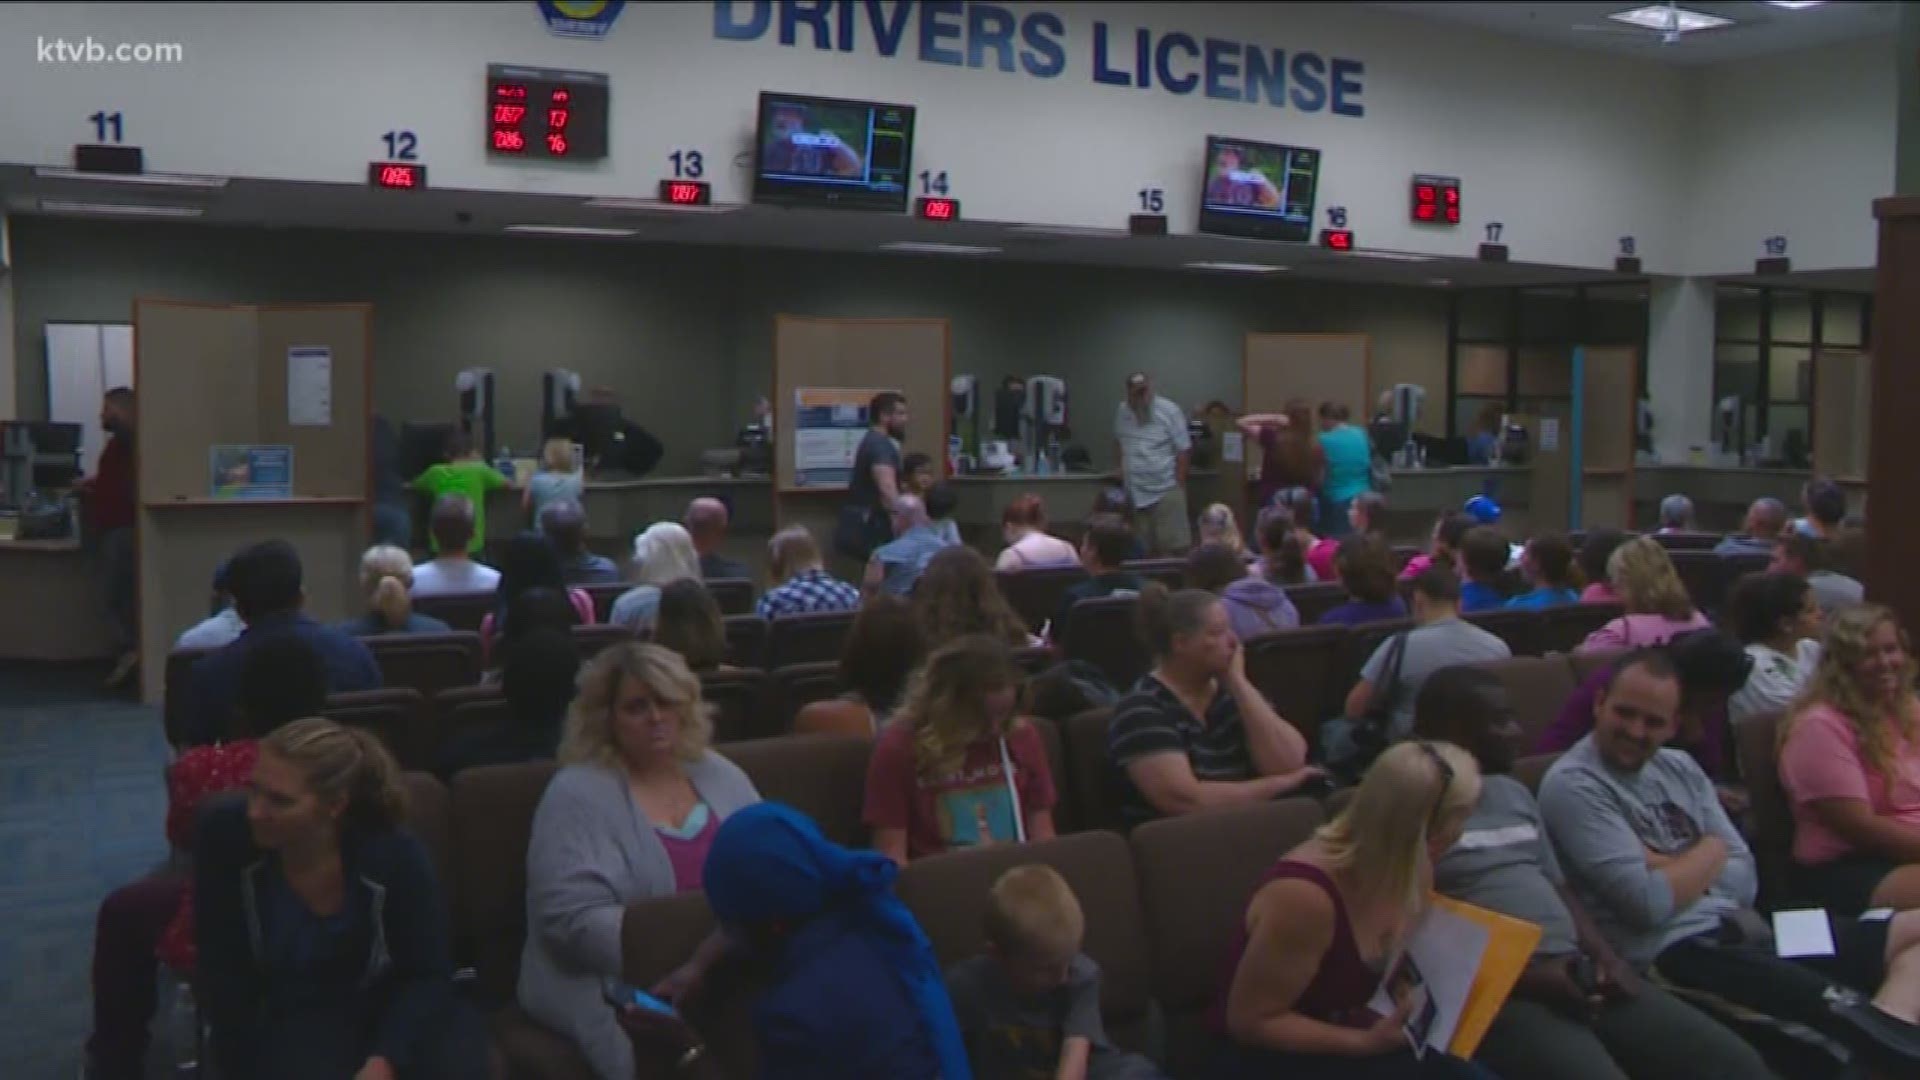 Some people had to endure long waits at the DMV in Ada County today.